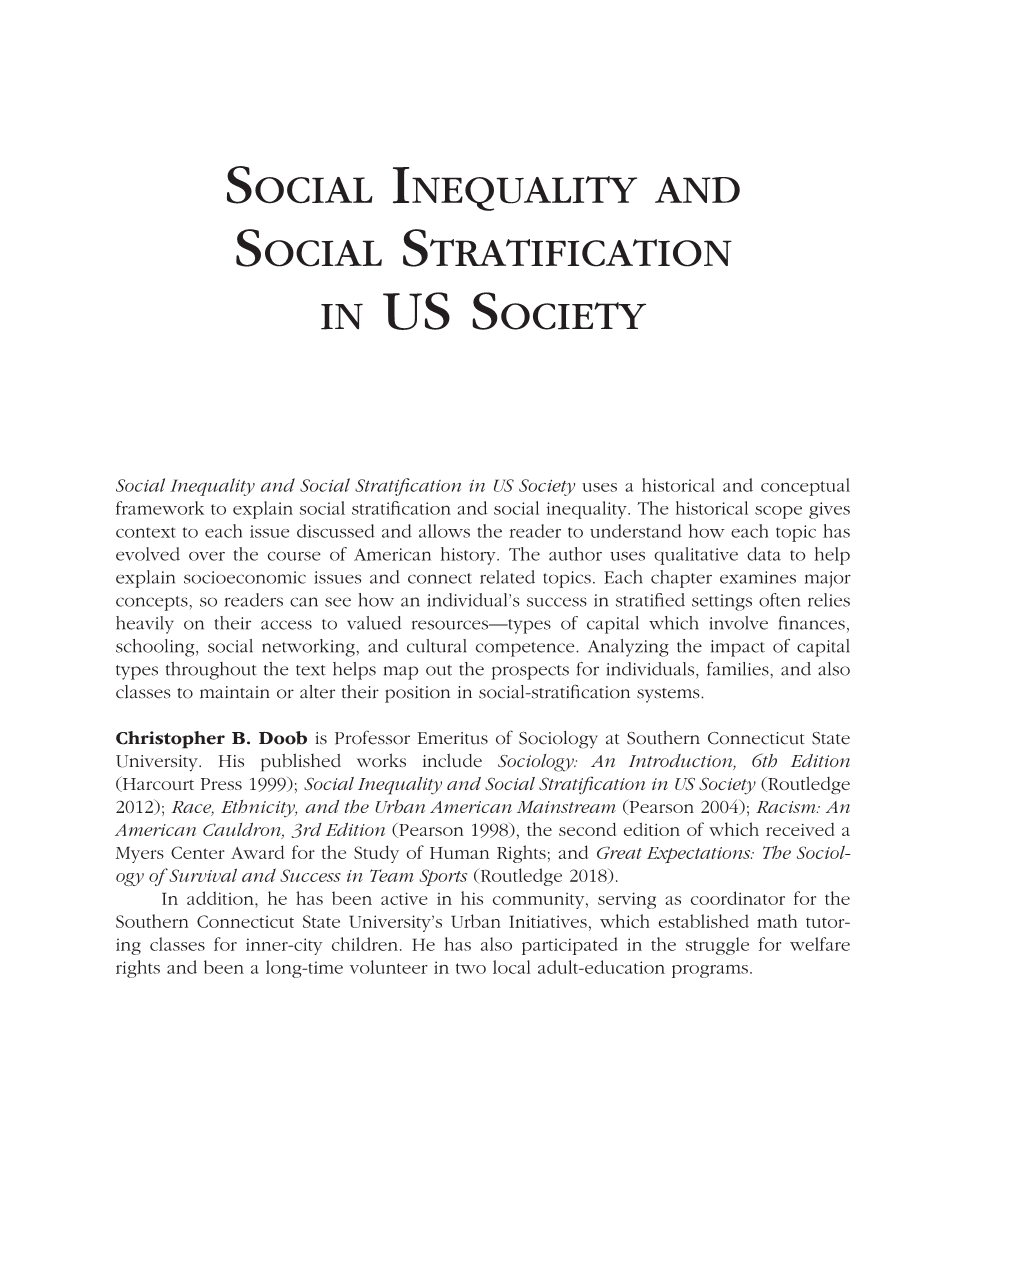 Social Inequality and Social Stratification in US Society Uses a Historical and Conceptual Framework to Explain Social Stratification and Social Inequality